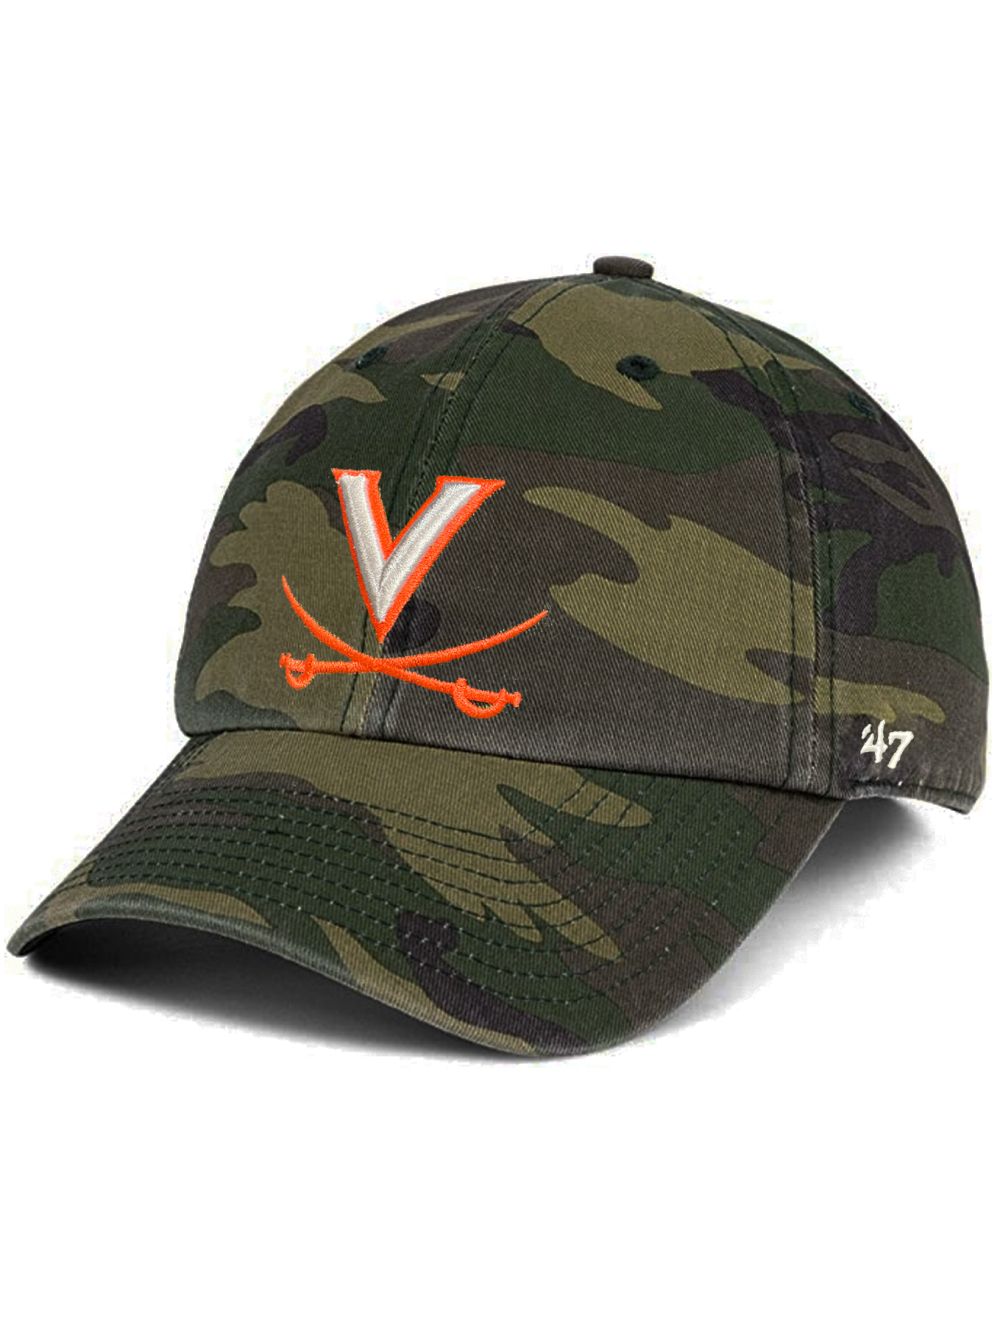 https://mincers.com/media/catalog/product/cache/33958134c3eee94557aec7c86a48adbc/rdi/rdi/47-brand-real-tree-camouflage-hat-47-brand-88-real-tree-camo_1.jpg